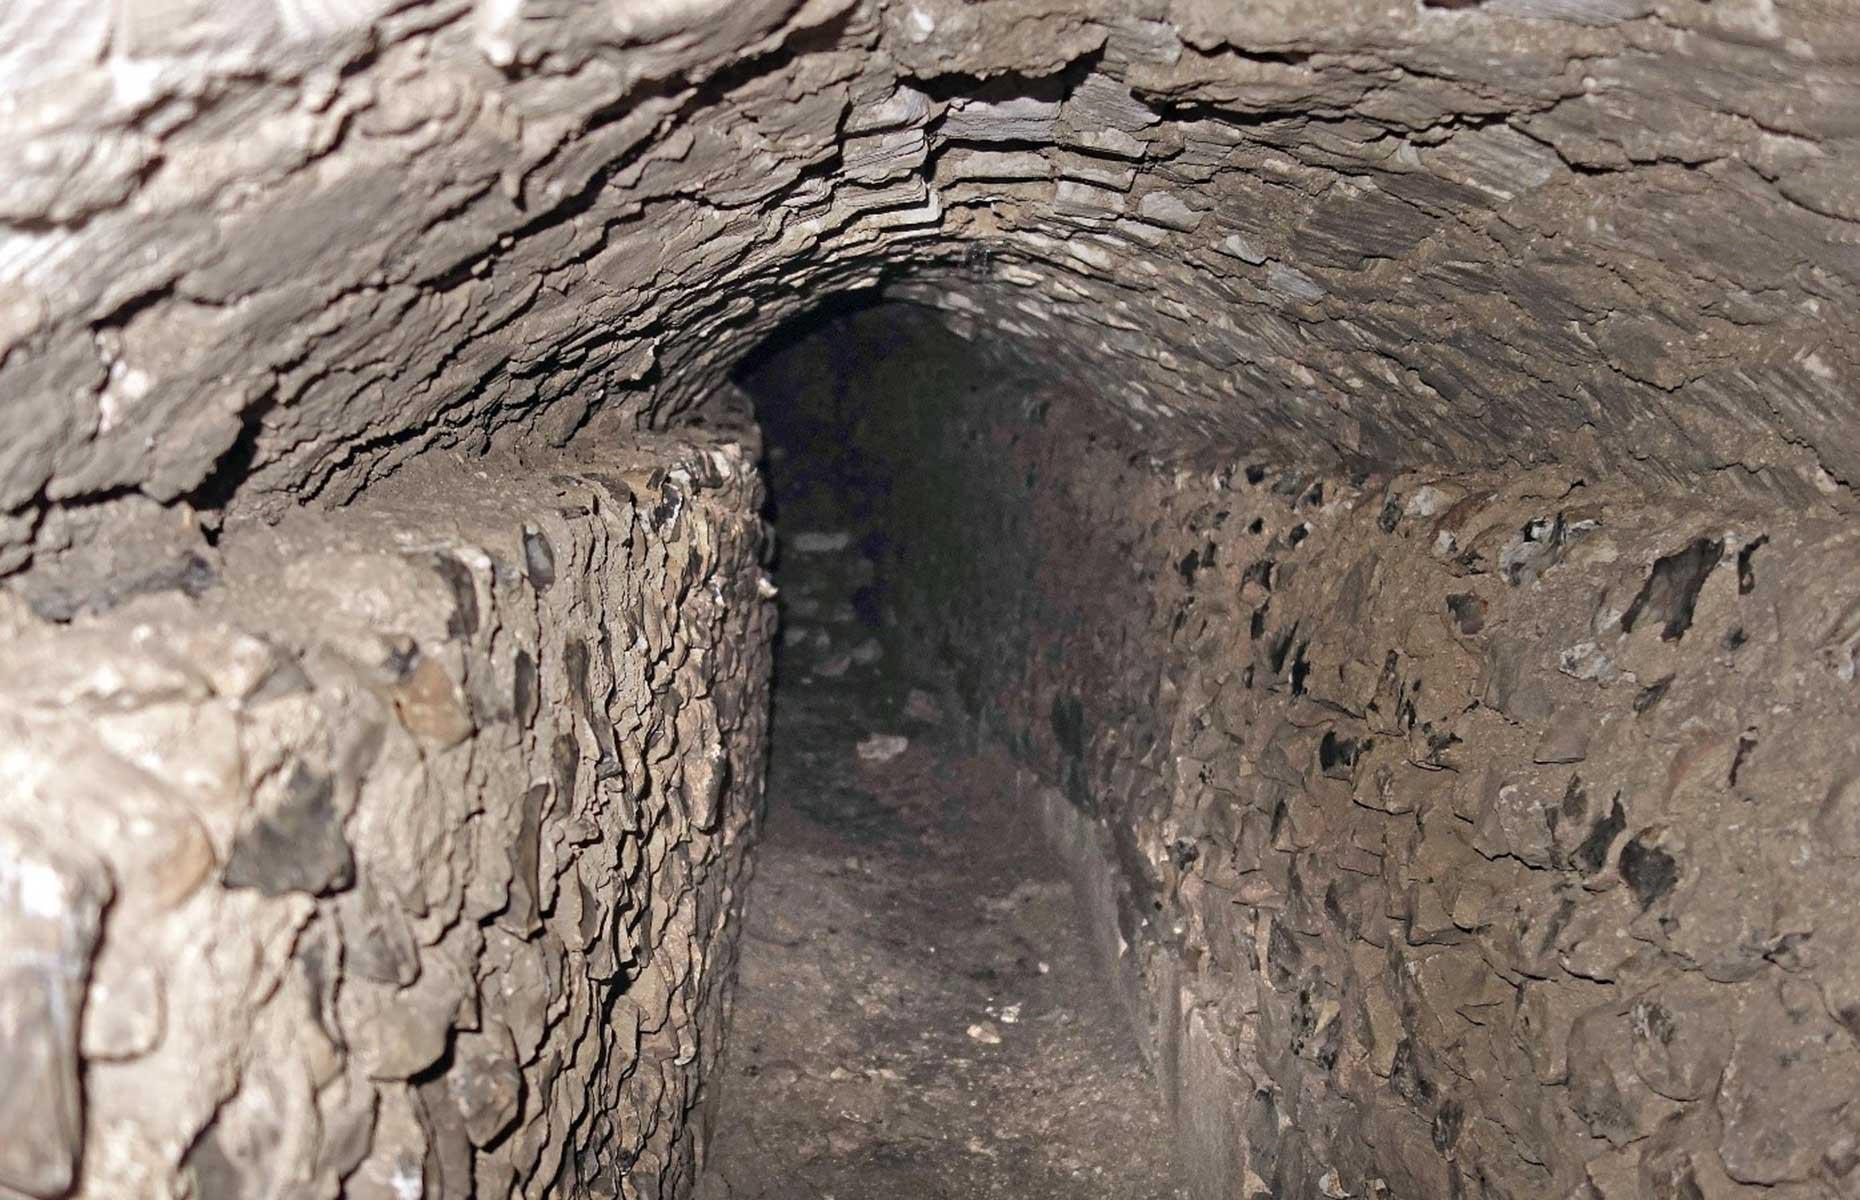 <p>In August 2022 archaeologists and volunteers from the Hyde900 charity unearthed a medieval water tunnel, dating back to King Alfred the Great's reign. Located near Hyde Abbey, Alfred's final resting place, the '<a href="https://www.bbc.co.uk/news/uk-england-hampshire-62632403">extraordinary discovery</a>' likely supplied water to the refectory, kitchens, infirmary of the abbey and latrines of the monks' dormitories.</p>